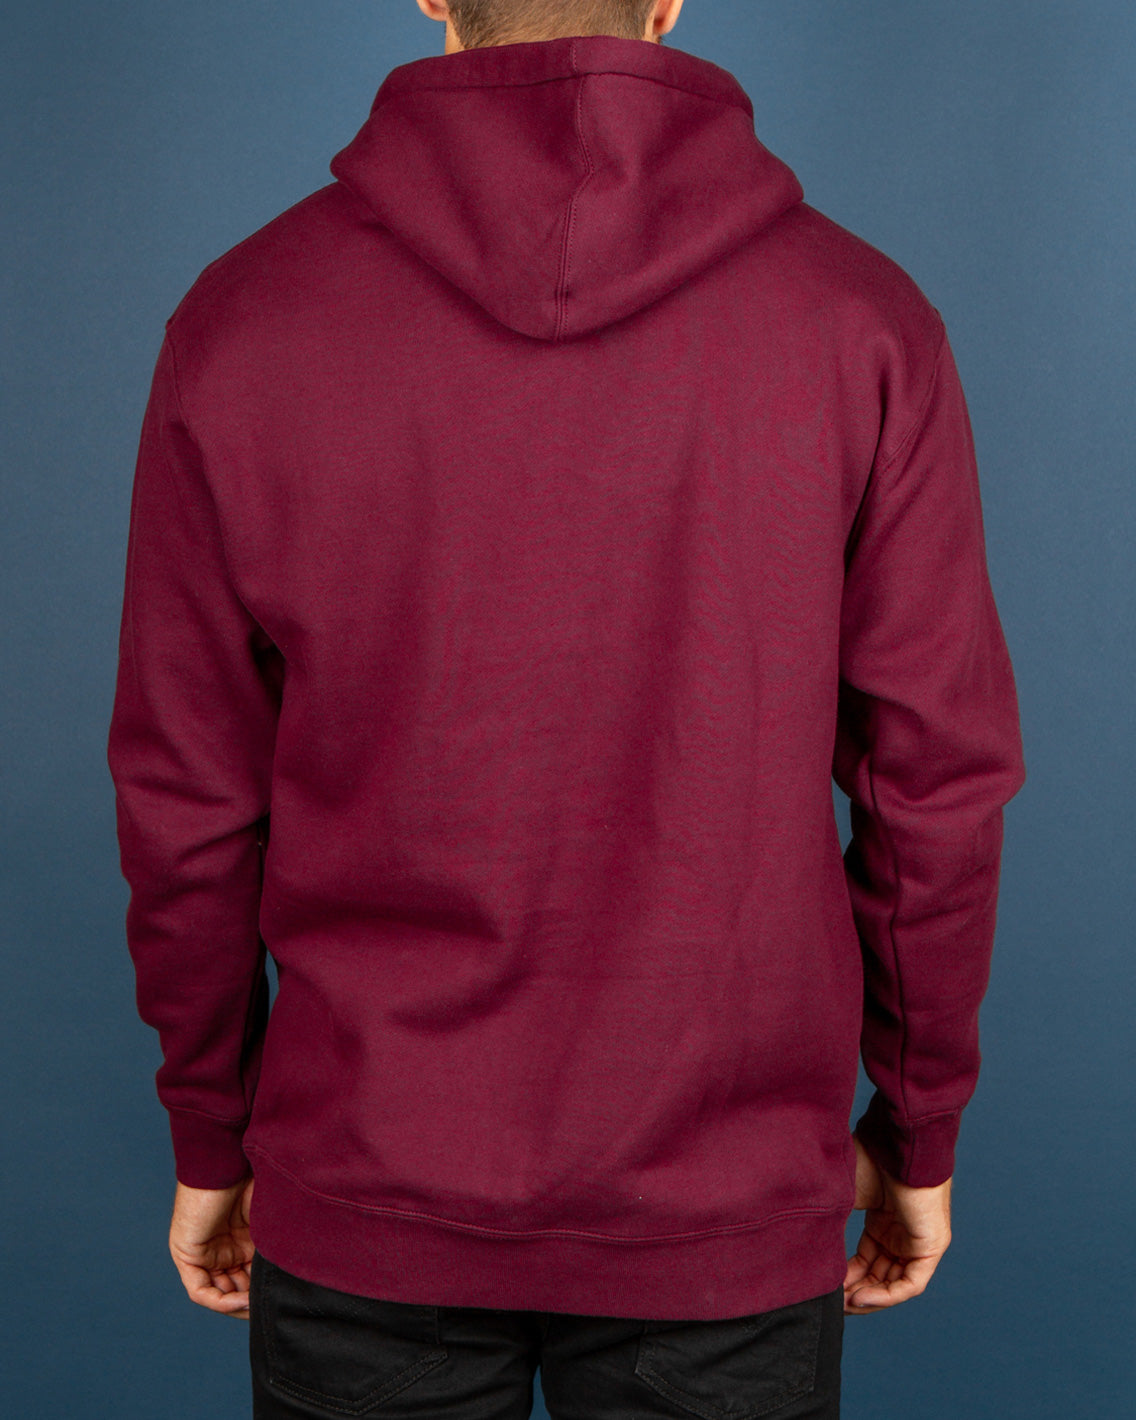 The Pass~Port Olive Puff Print Hoodie in Marron brings a comfortable and warm pullover style. Constructed from a premium cotton blend with a cosy fleece interior, this hoodie is quipped with an adjustable drawstring hood, front pouch pocket and ribbed trims. Signed off and stamped with a custom puff print logo graphic on the centre chest.